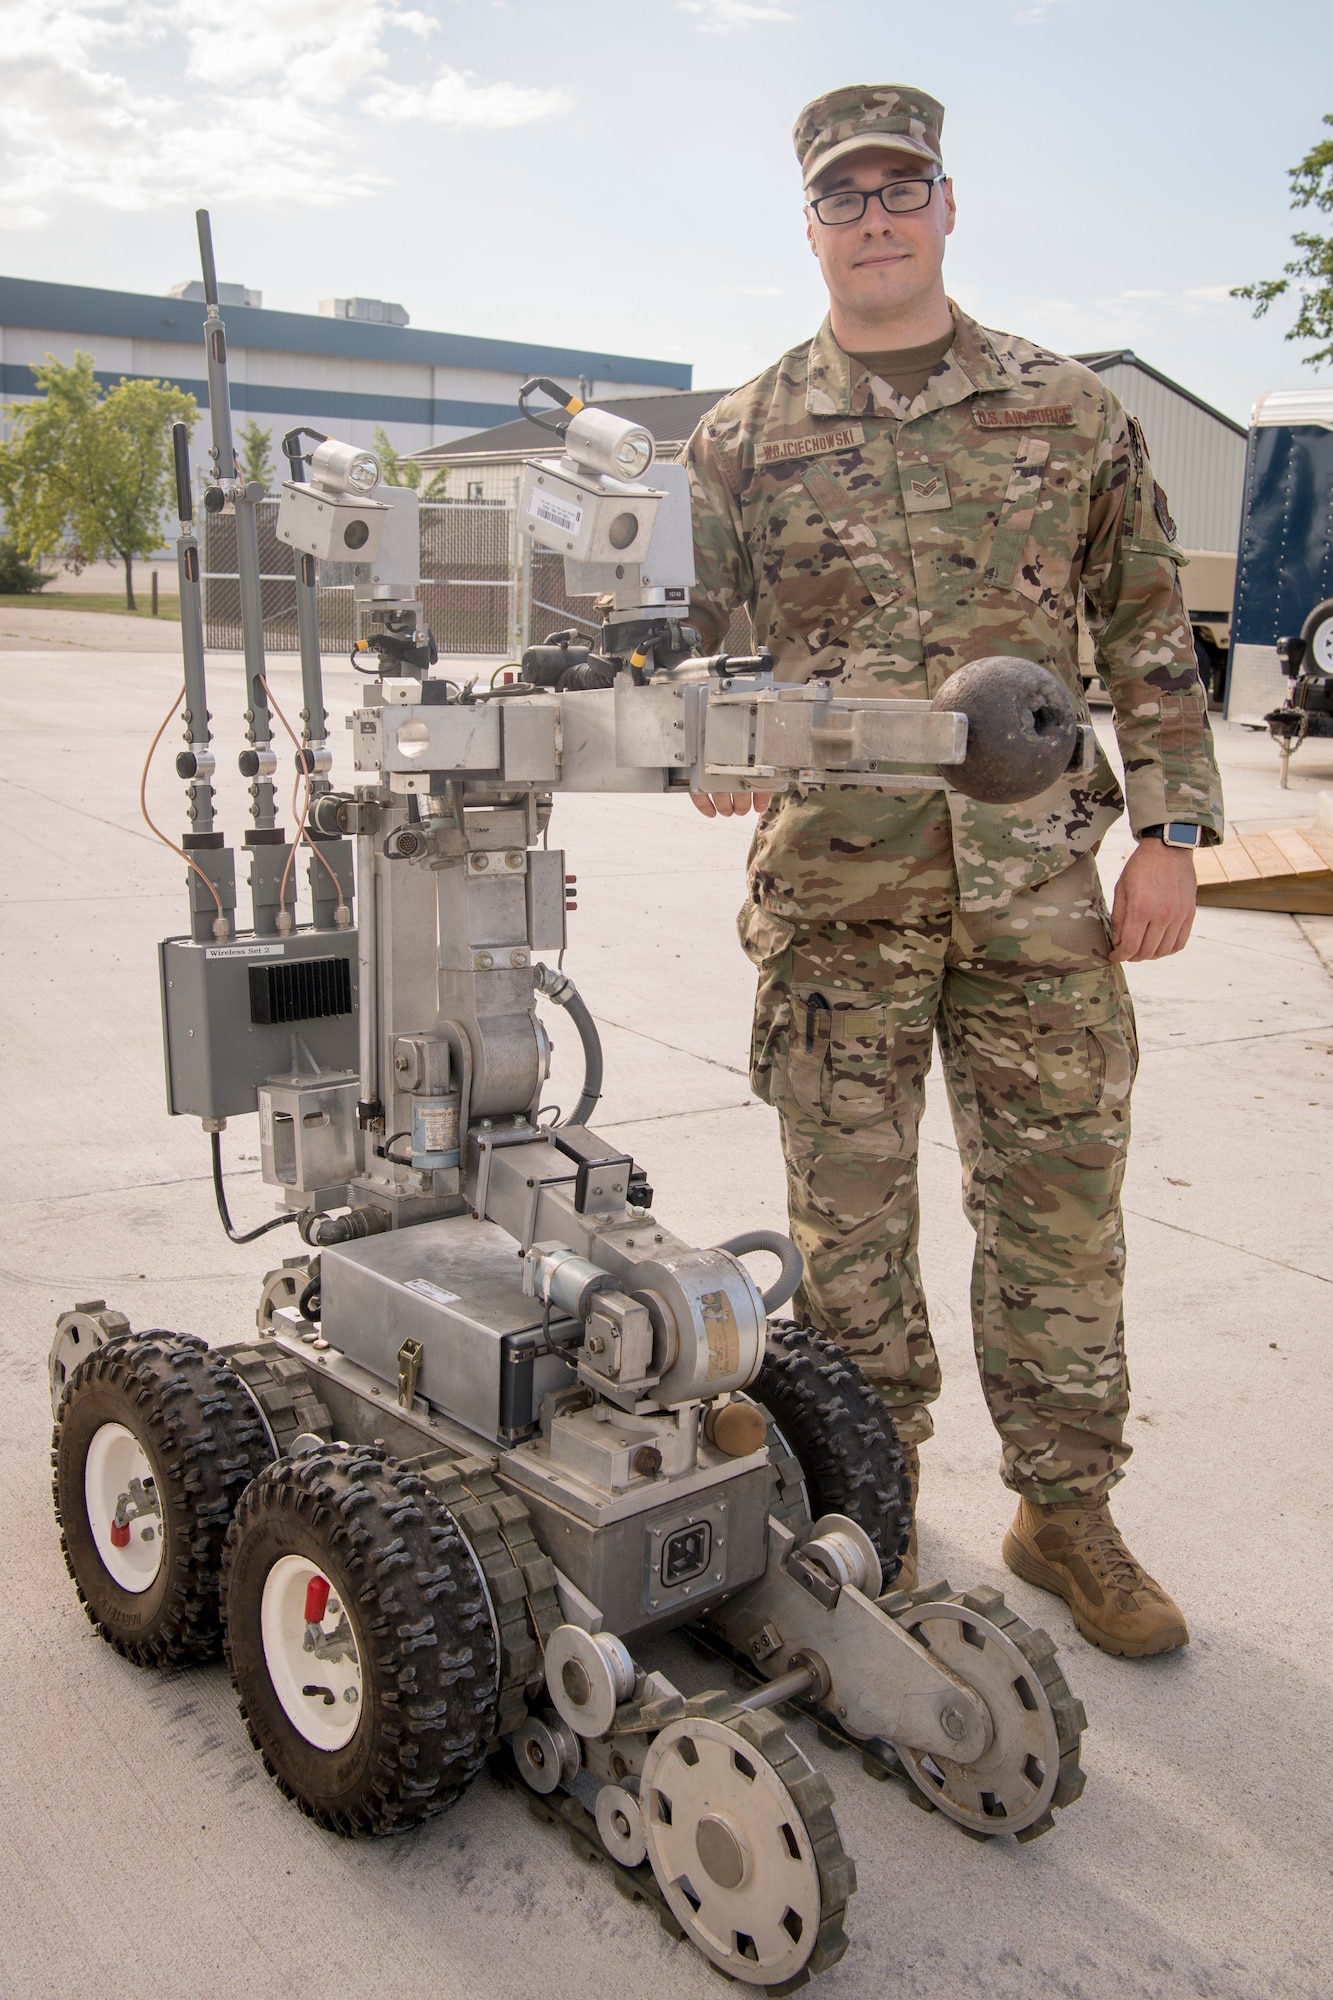 Senior Airman Stephan Wojciechowski, 434th Civil Engineer Squadron explosives ordnance disposal technician, poses with an Air Force medium sized robot holding a civil war era cannon ball at Grissom Air Reserve Base, Indiana, July 12, 2020. Wojciechowski and a team of four other EOD specialists were sent to the Berrien Springs County Plaza Museum Berrien Springs, Michigan, June 18, when a new employee discovered multiple munitions, one with the message ‘danger, might be active’ attached to a post-it note.  (U.S. Air Force photo/Master Sgt. Ben Mota)